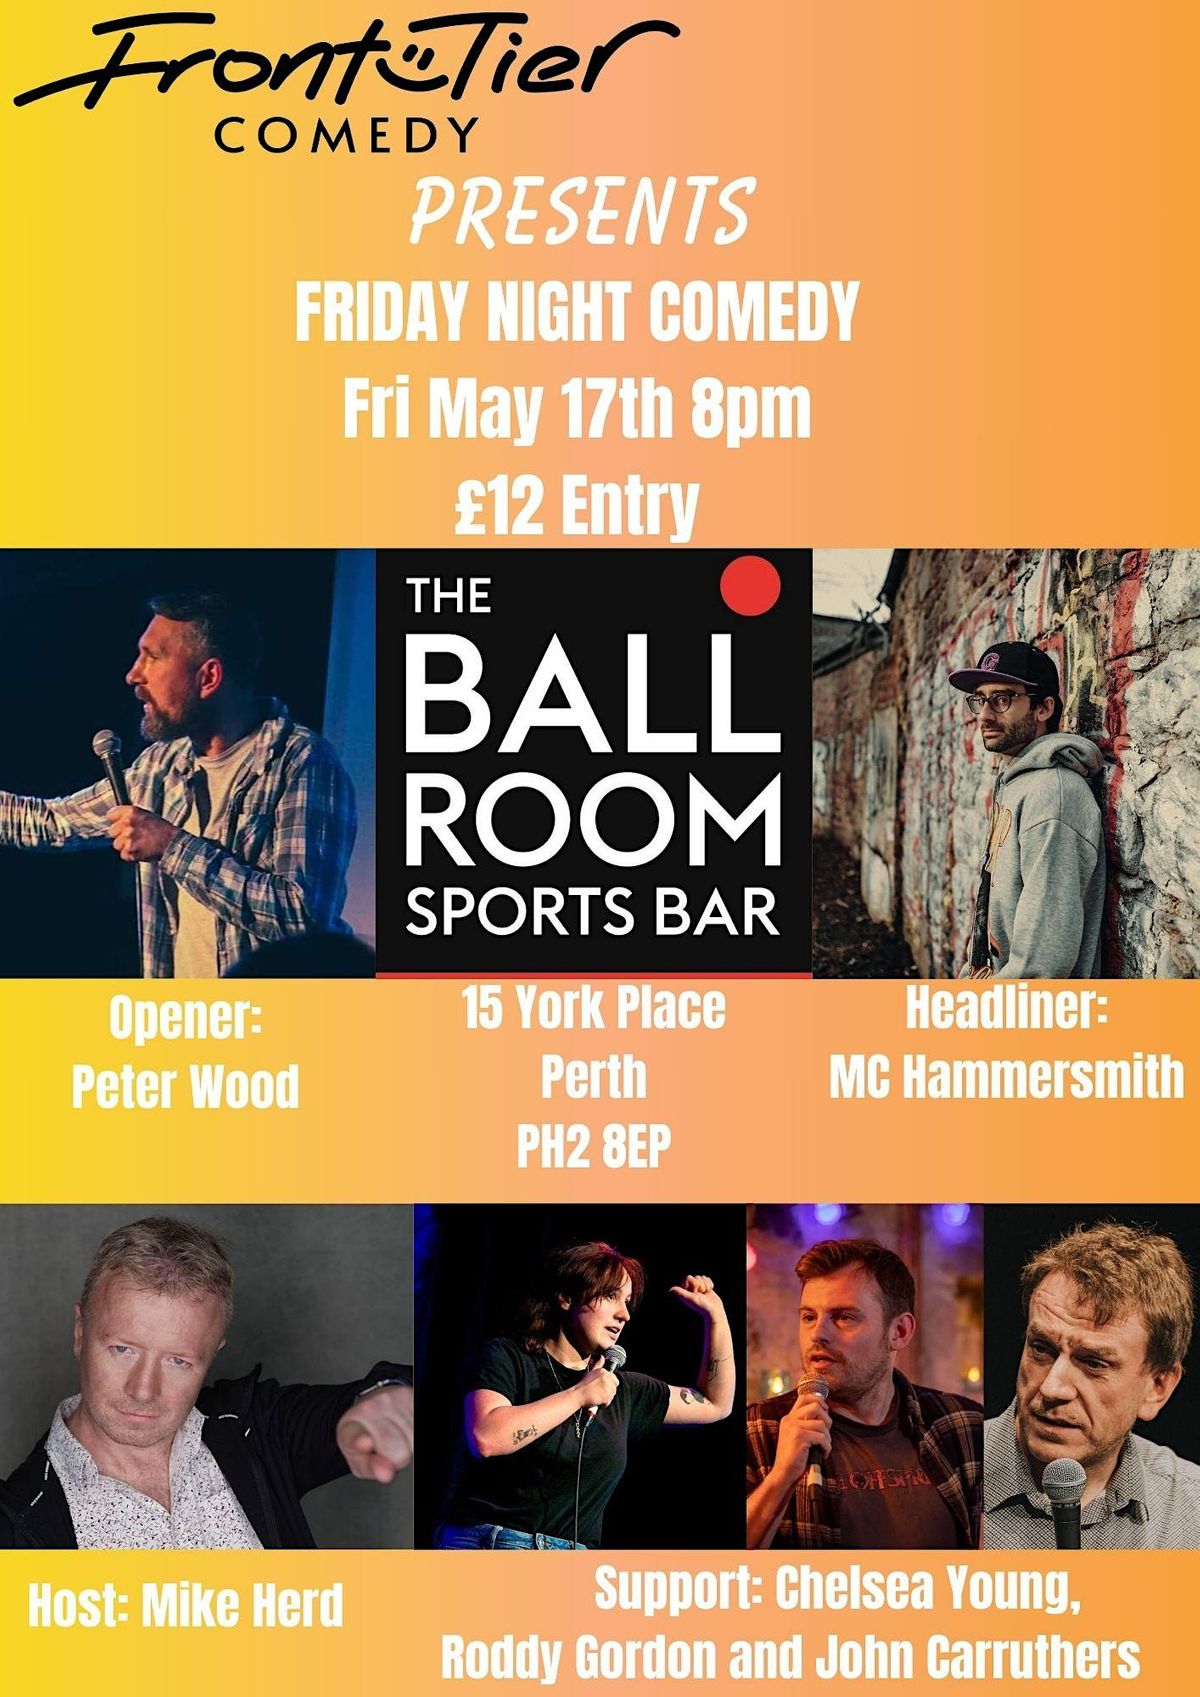 Friday Night Comedy with MC Hammersmith and Peter Wood